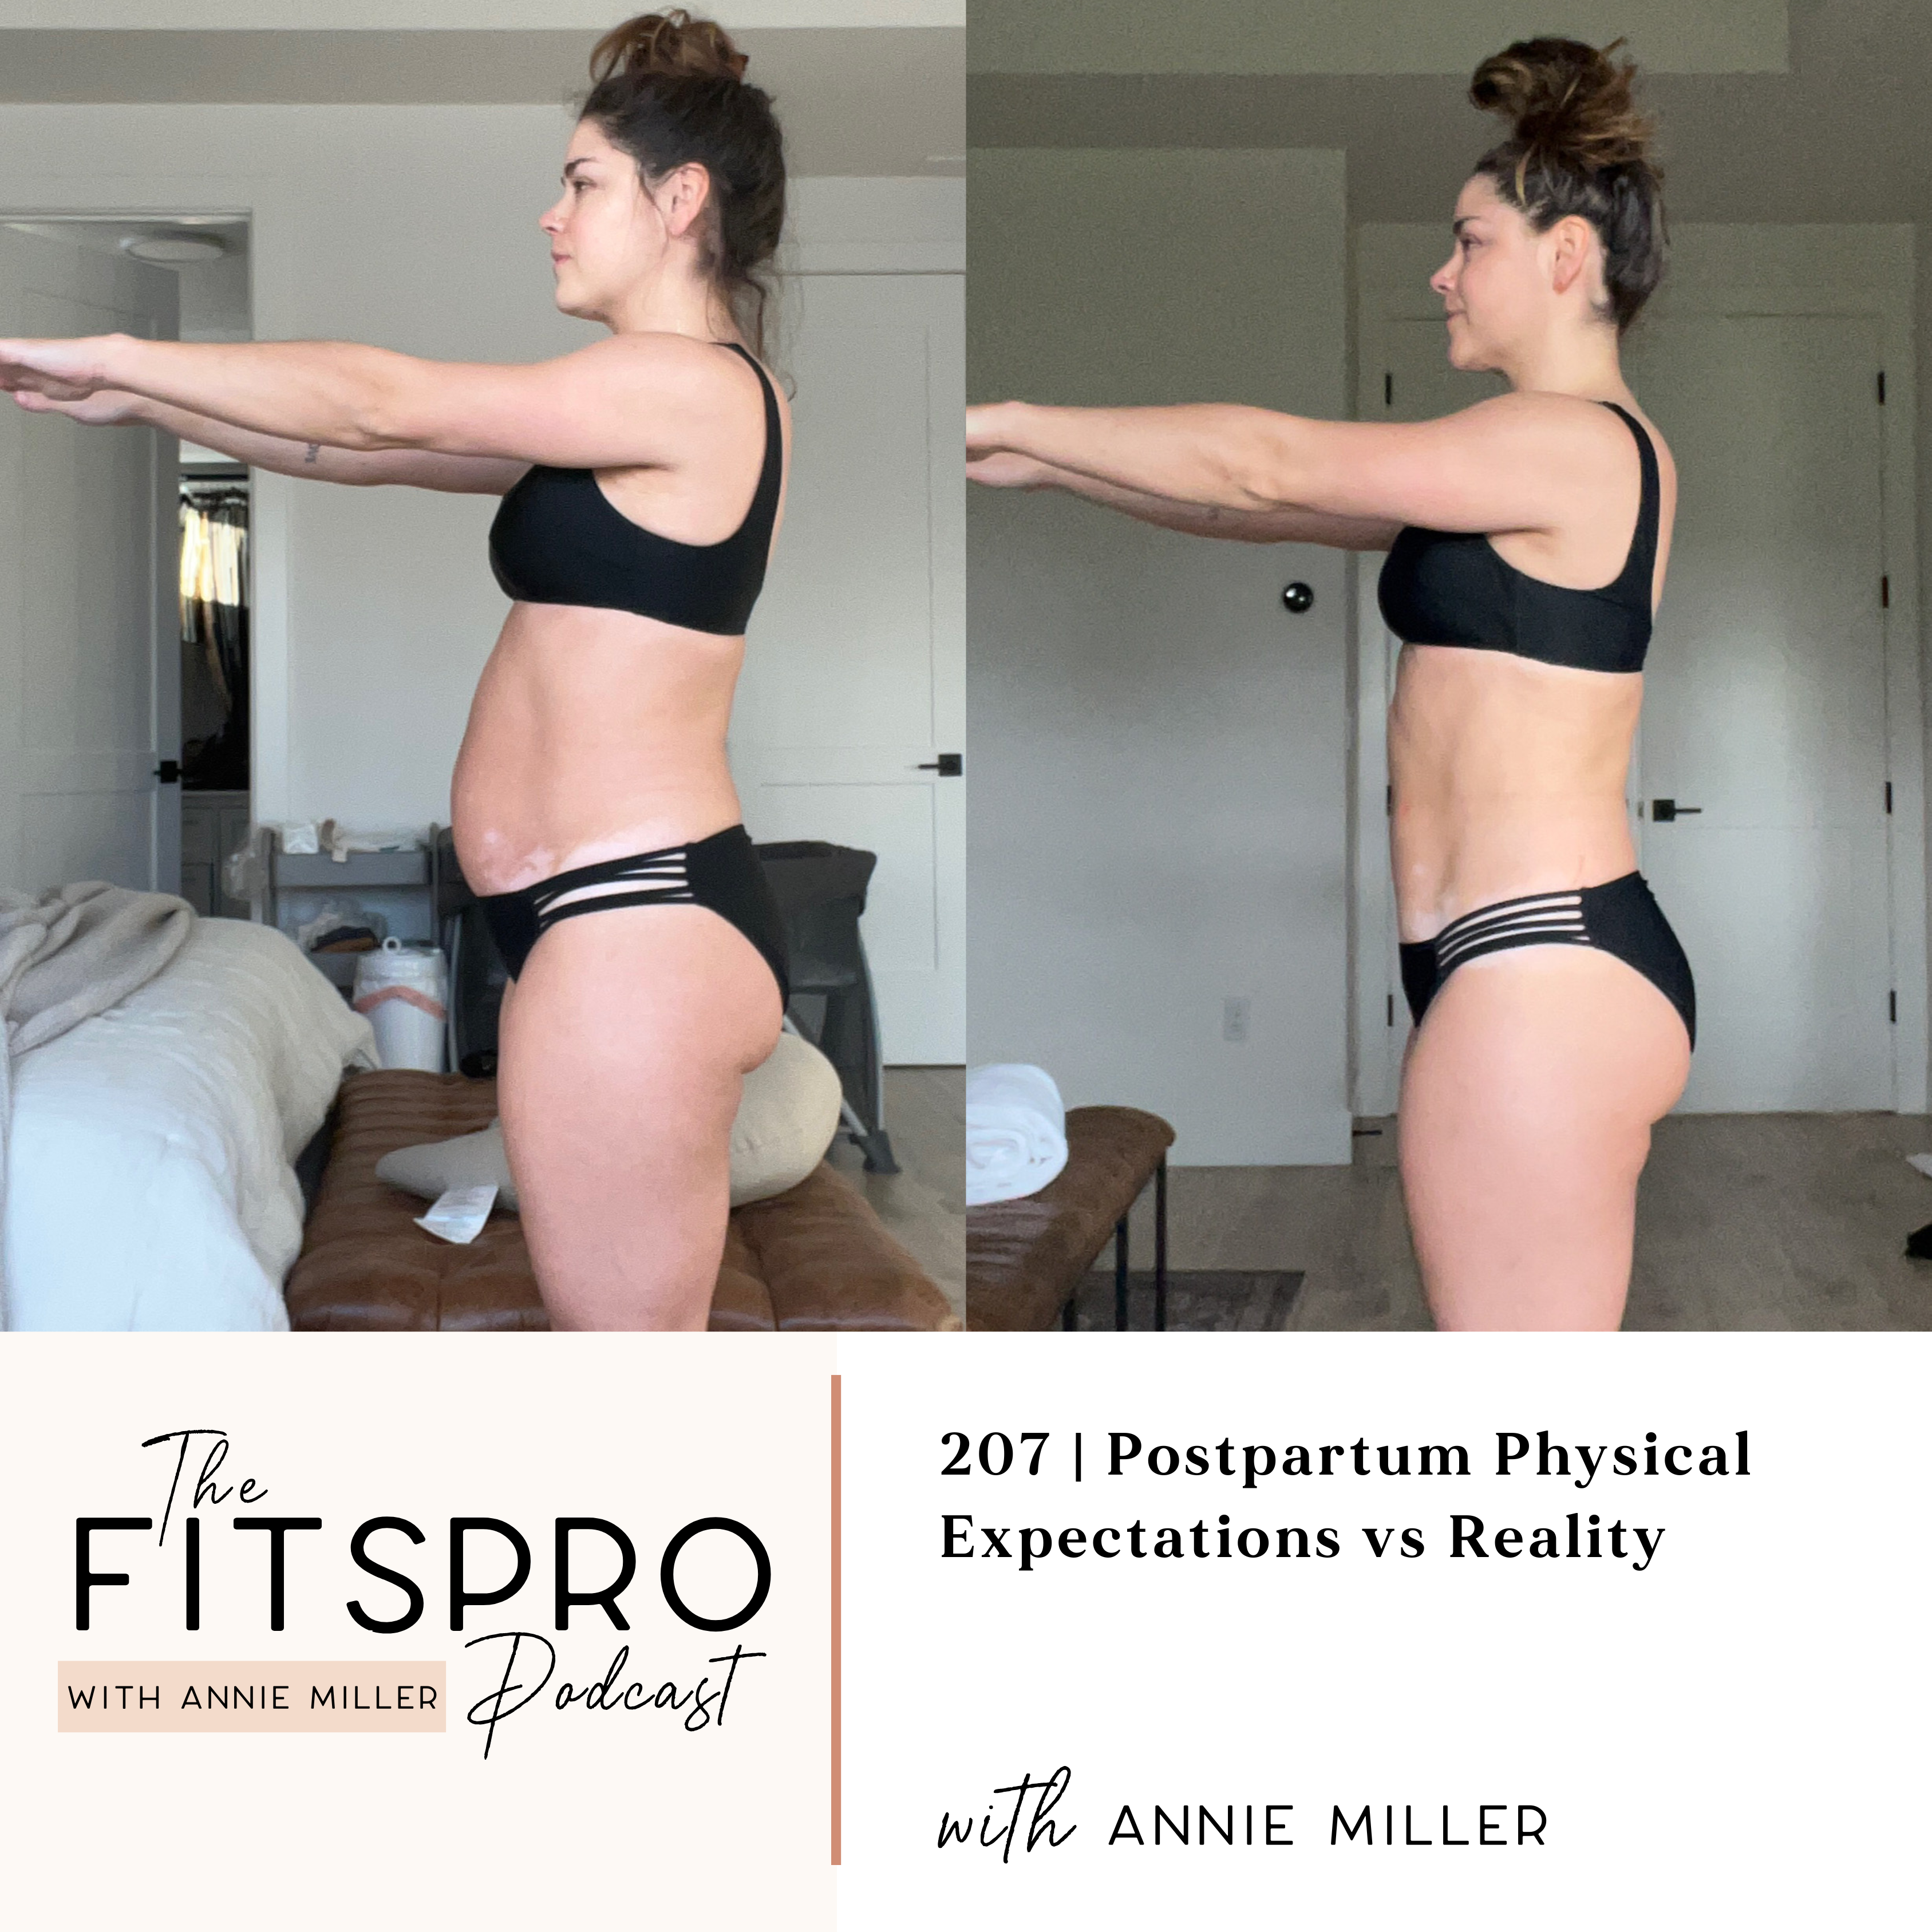 207 - Postpartum Physical Expectations vs Reality with Annie Miller